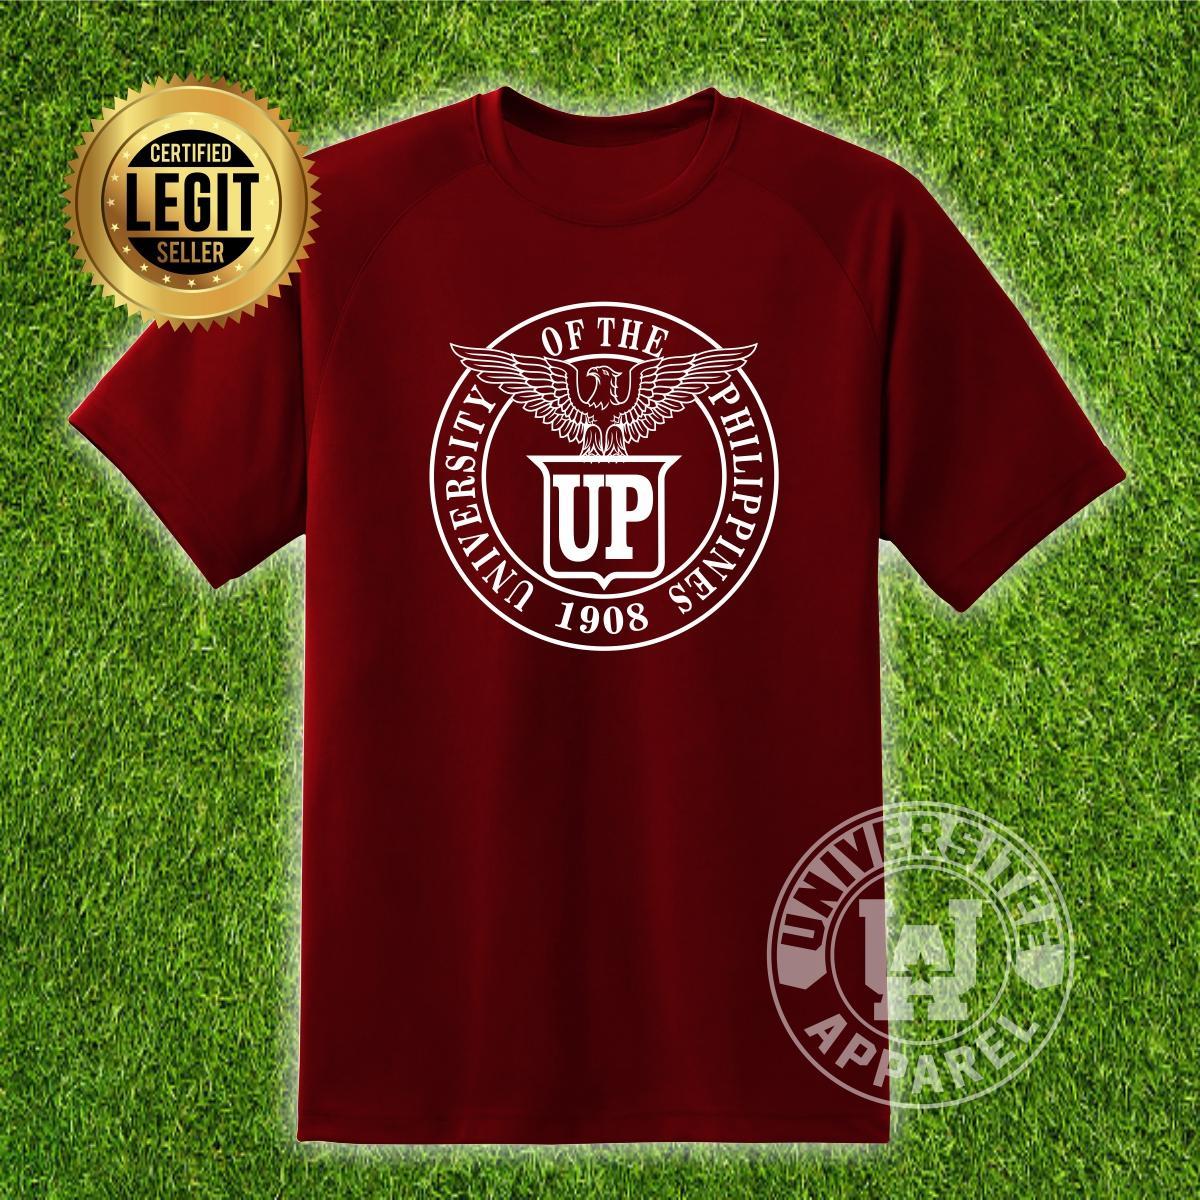 Clothing and Apparel Up Logo - T-Shirt Clothing for Men for sale - Mens Shirt Clothing online ...